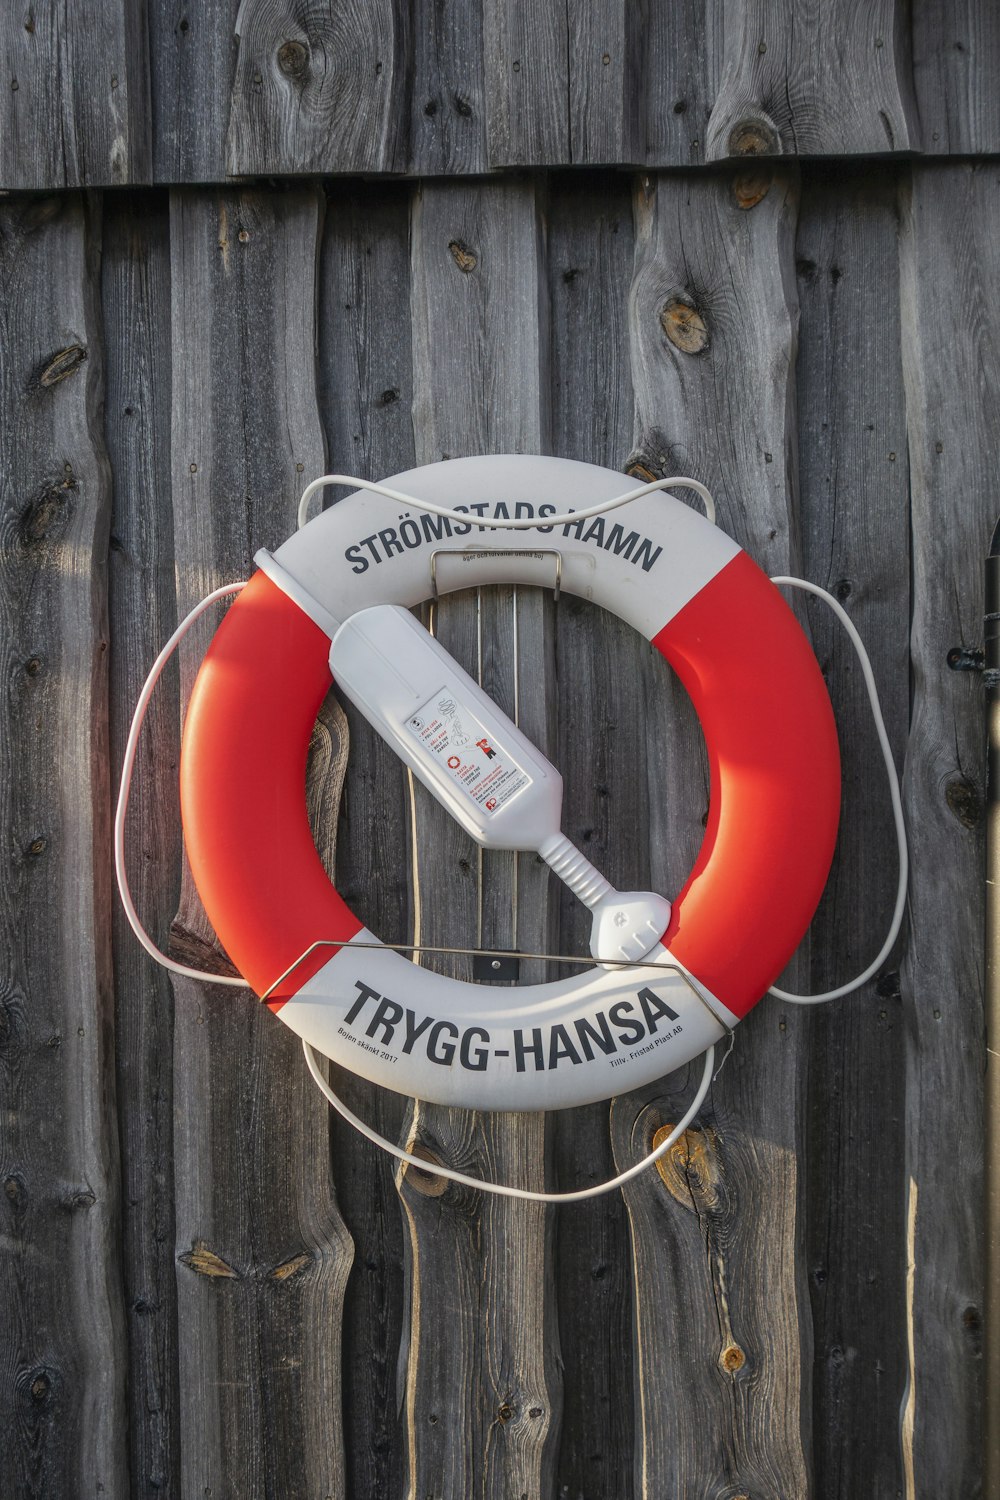 a life preserver attached to a wooden fence